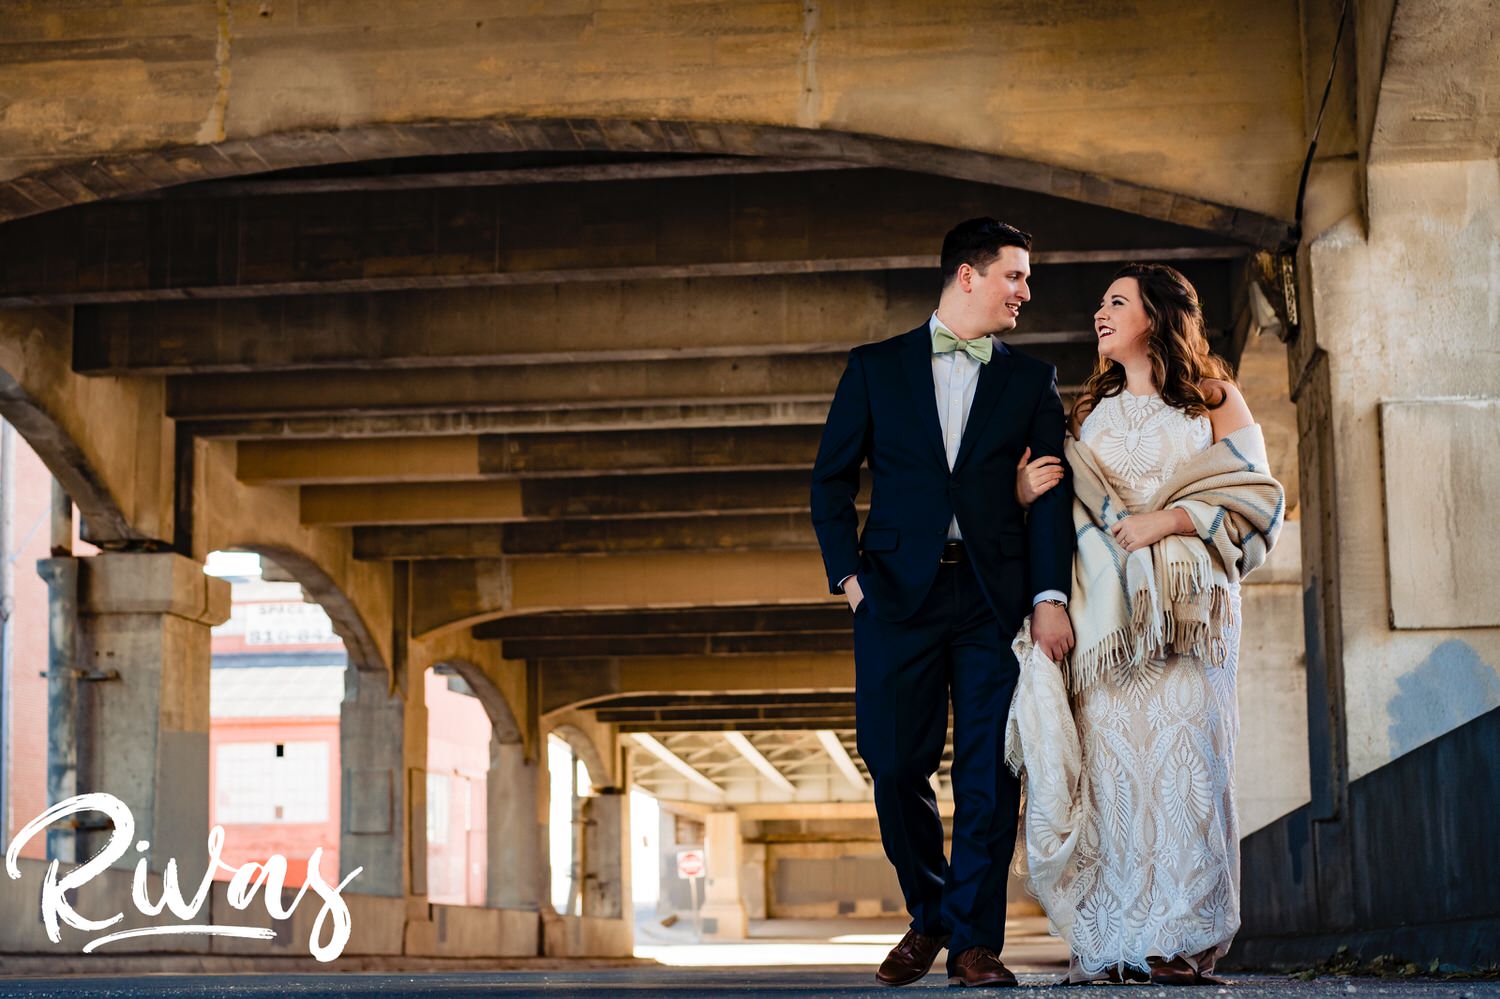 A colorful, candid picture of a bride and groom walking arm in arm up the 12th Street viaduct Bridge in Kansas City on the afternoon of their fall wedding day. 